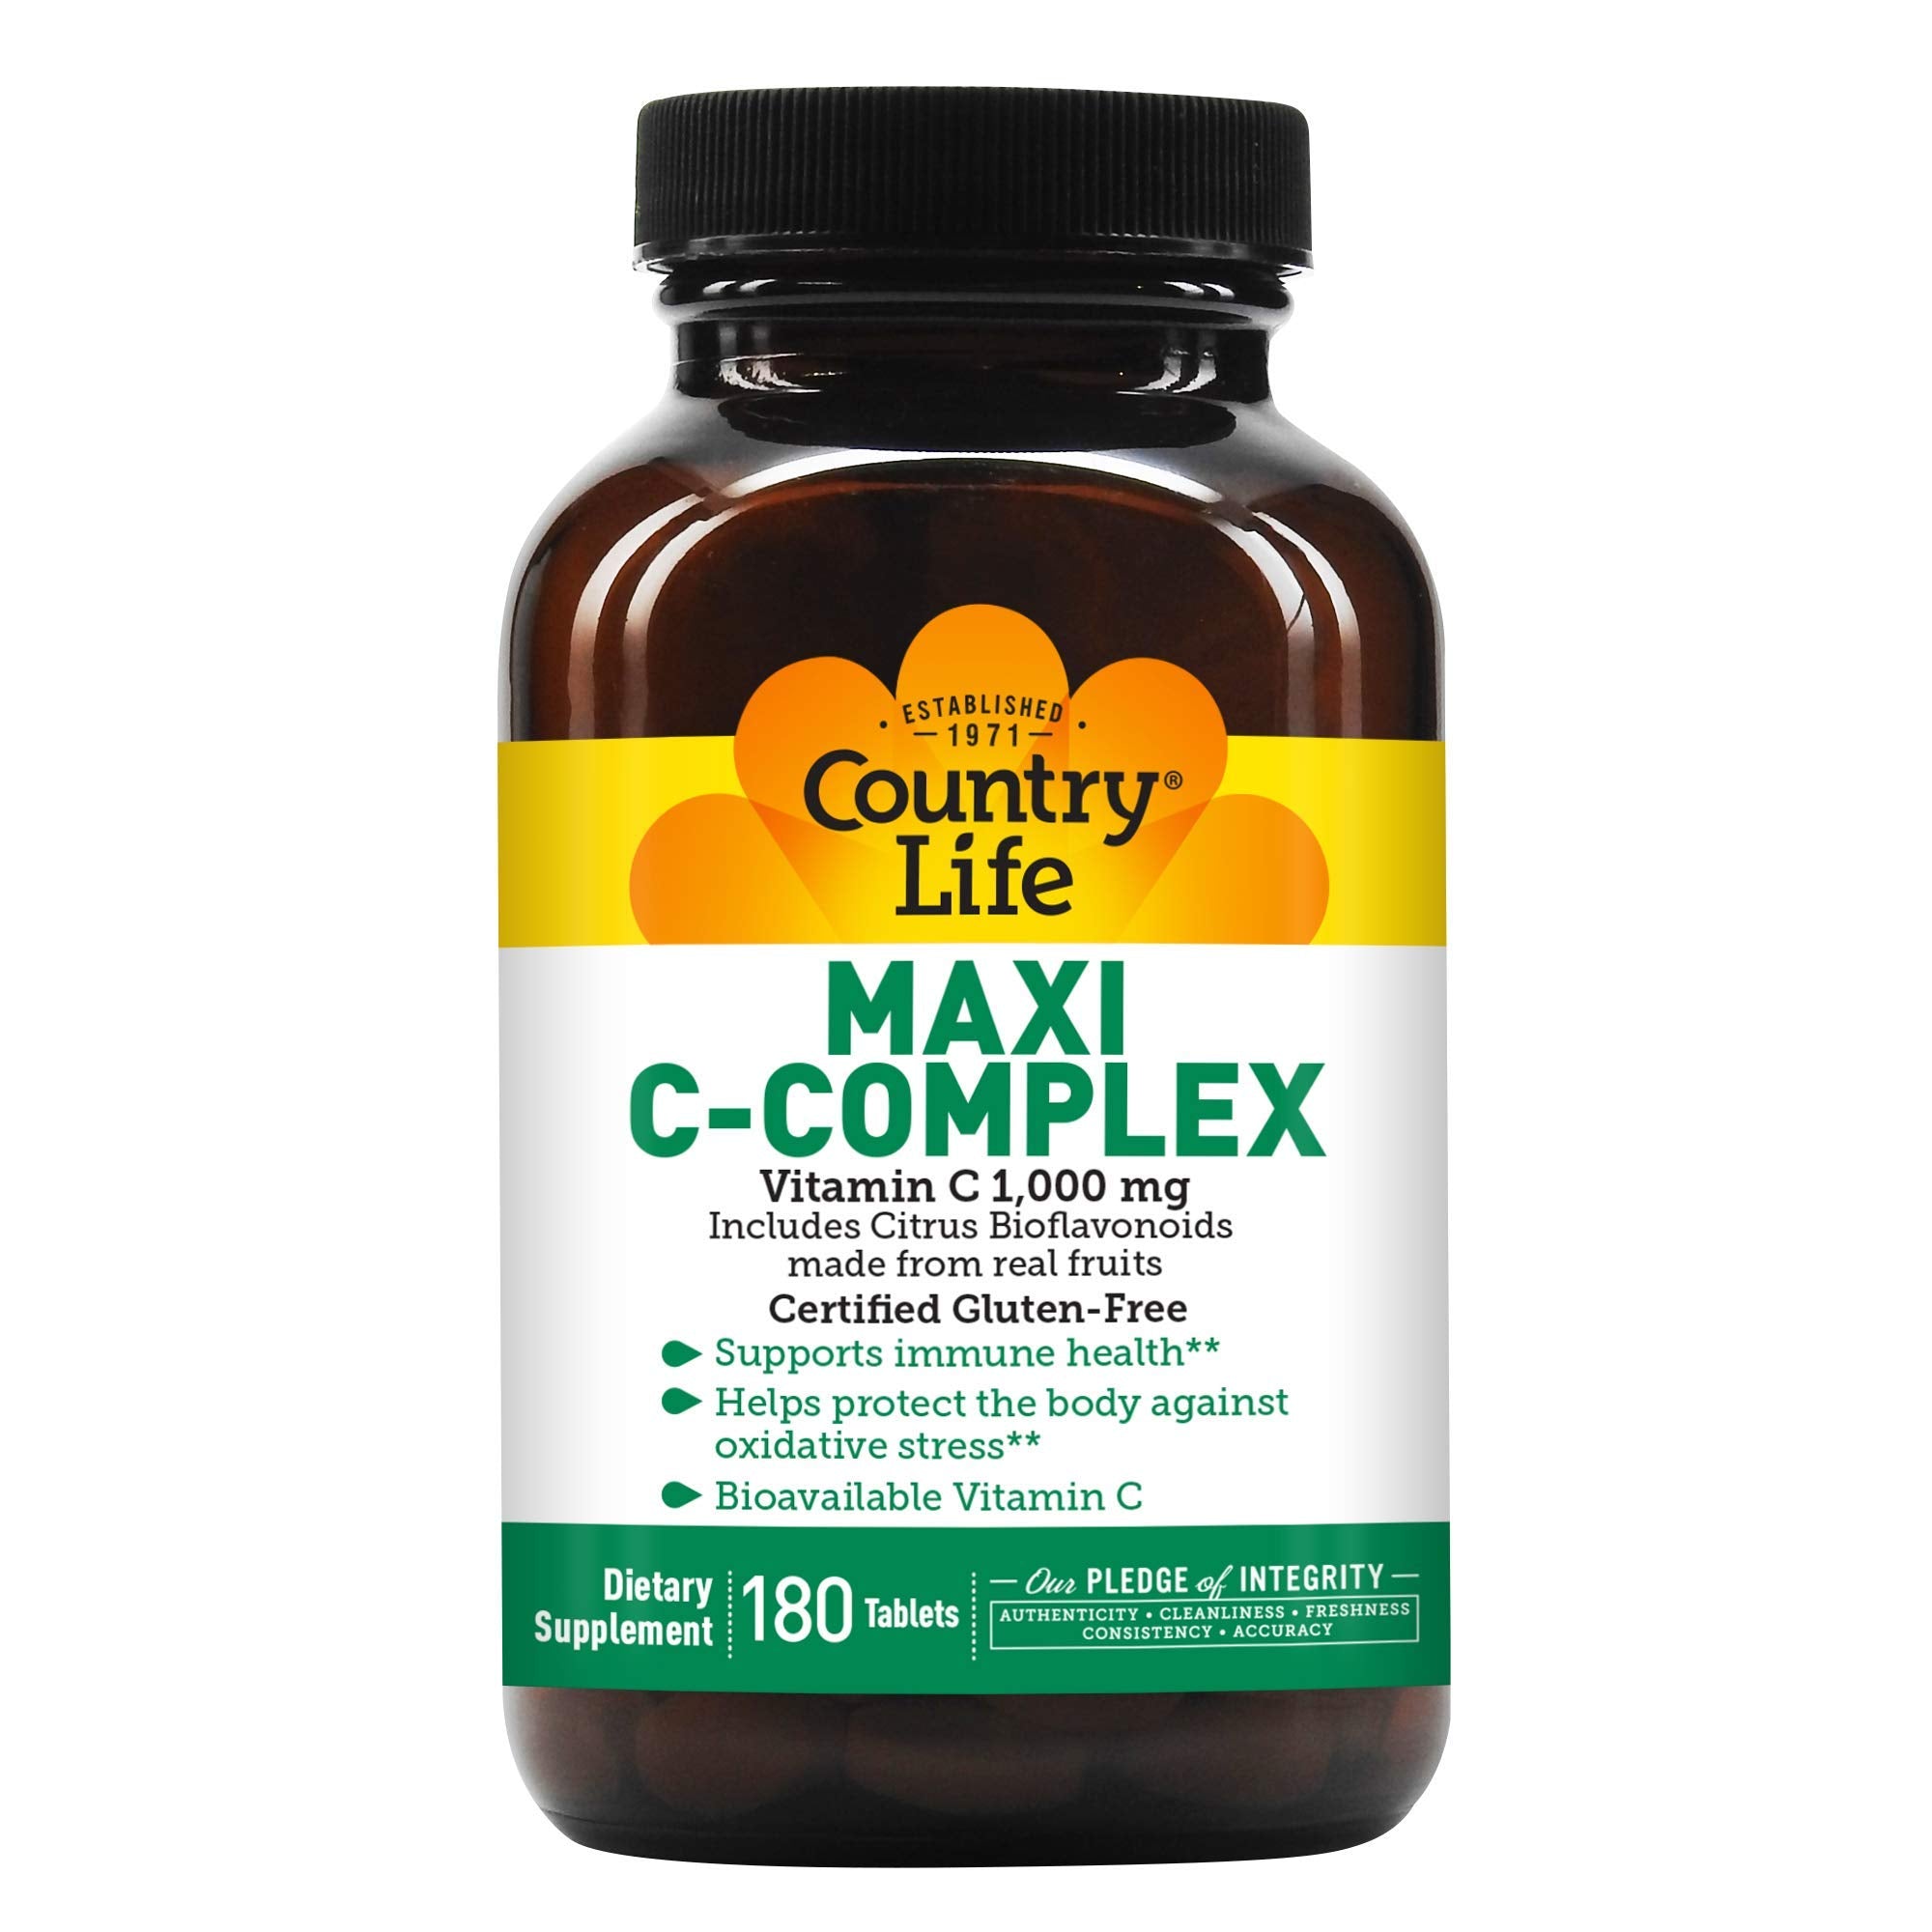 Country Life - Maxi C-Complex 1000 mg with Bioflavonoids - 180 Time Release Tablets